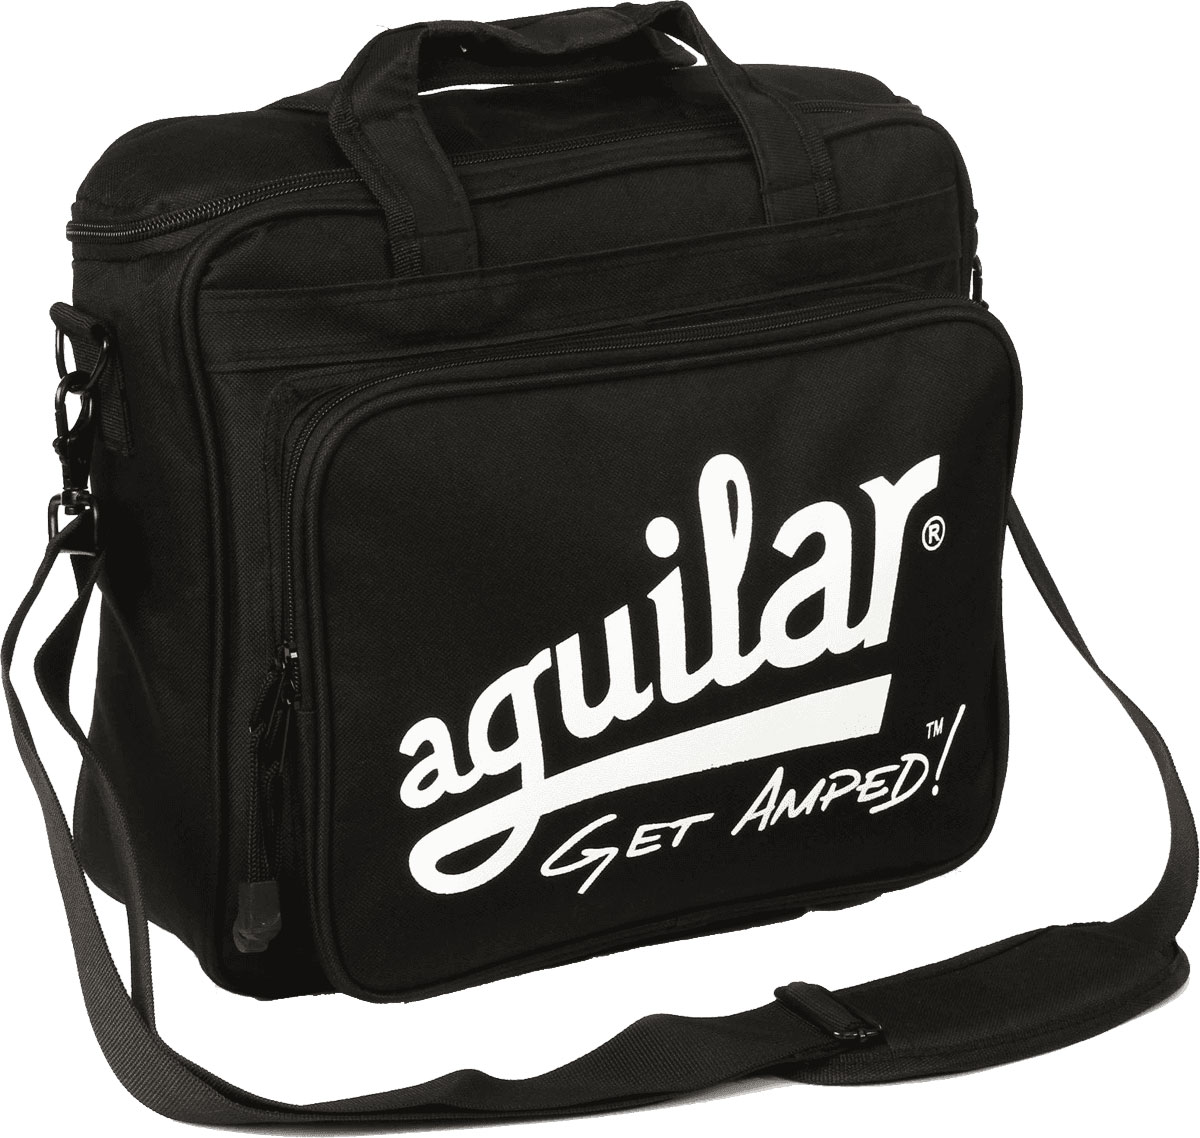 AGUILAR ACCESSORIES TRANSPORT BAGS FOR AG700 HEAD